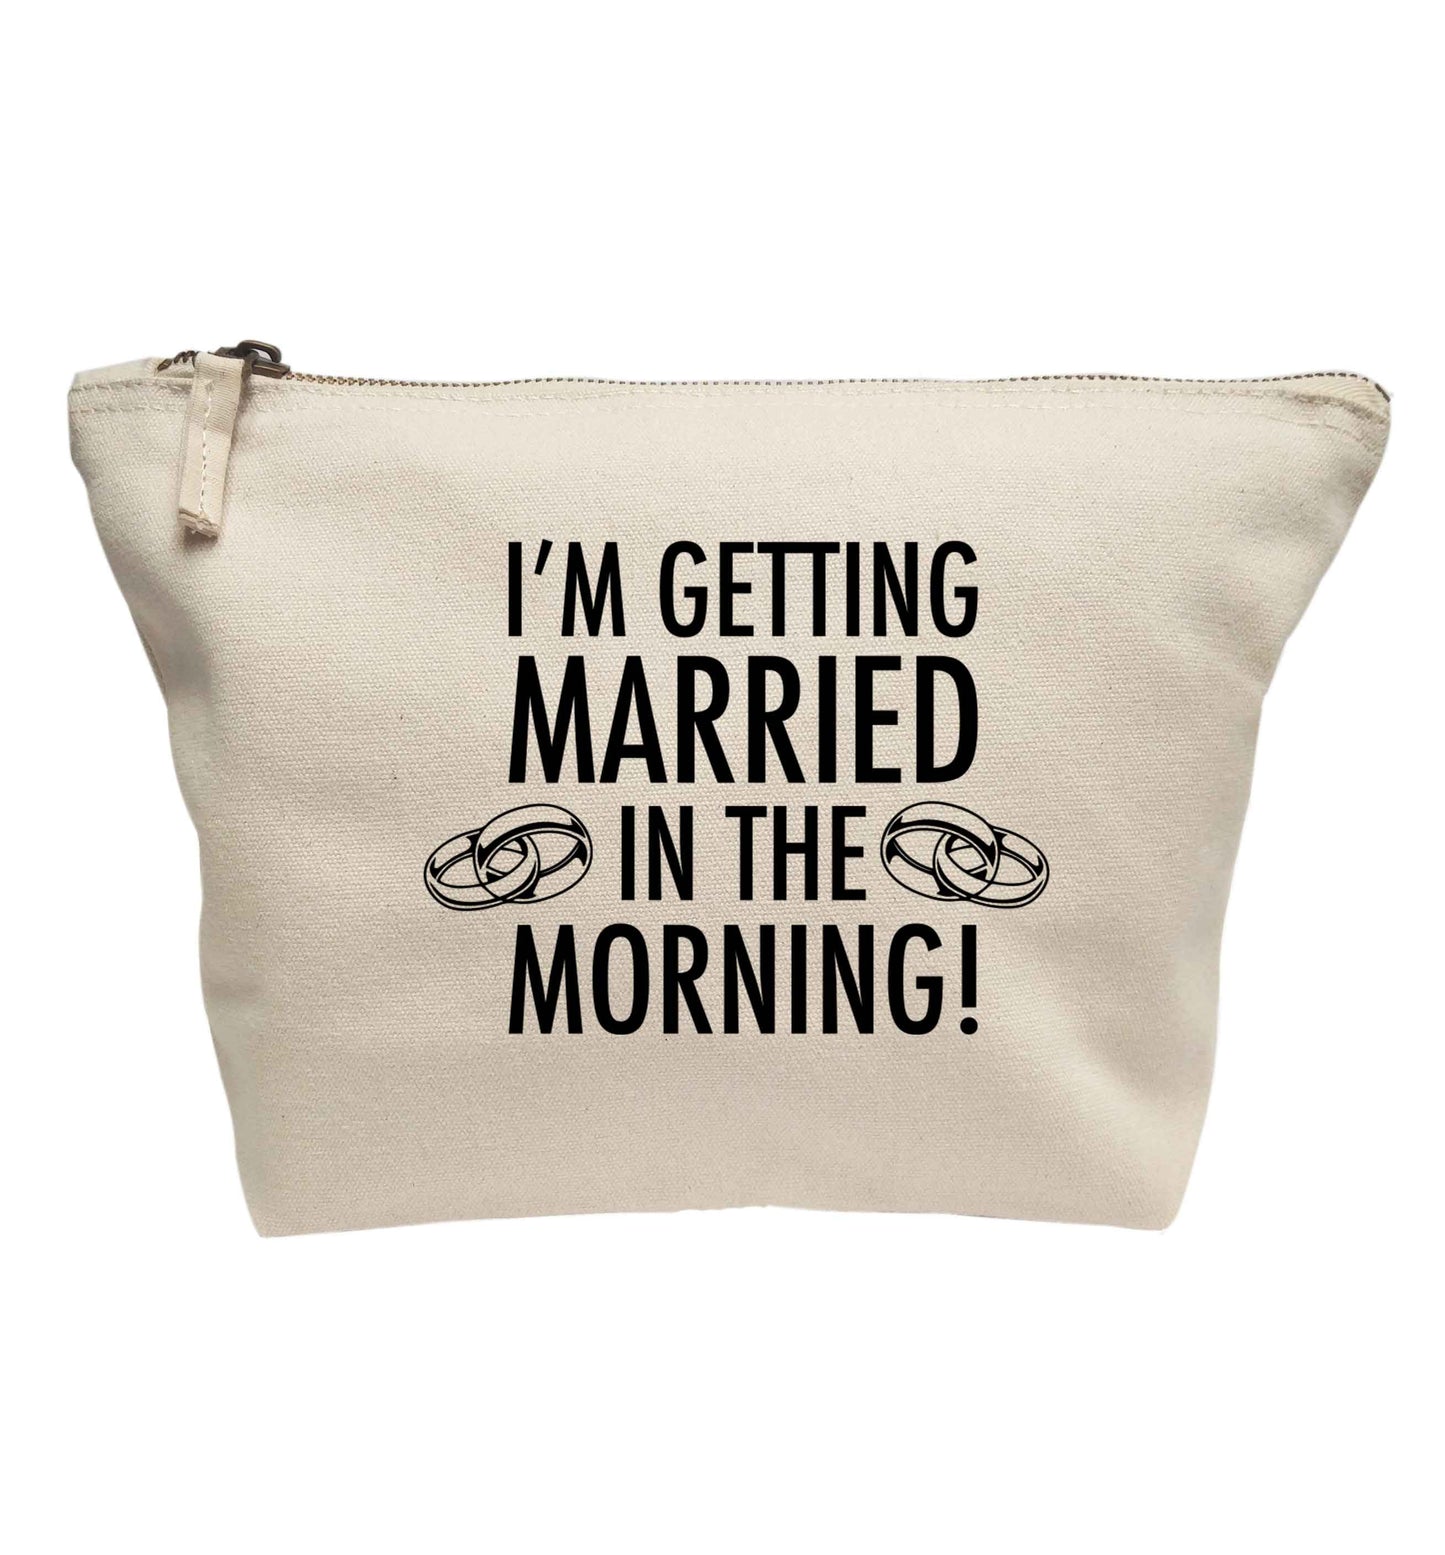 I'm getting married in the morning! | Makeup / wash bag